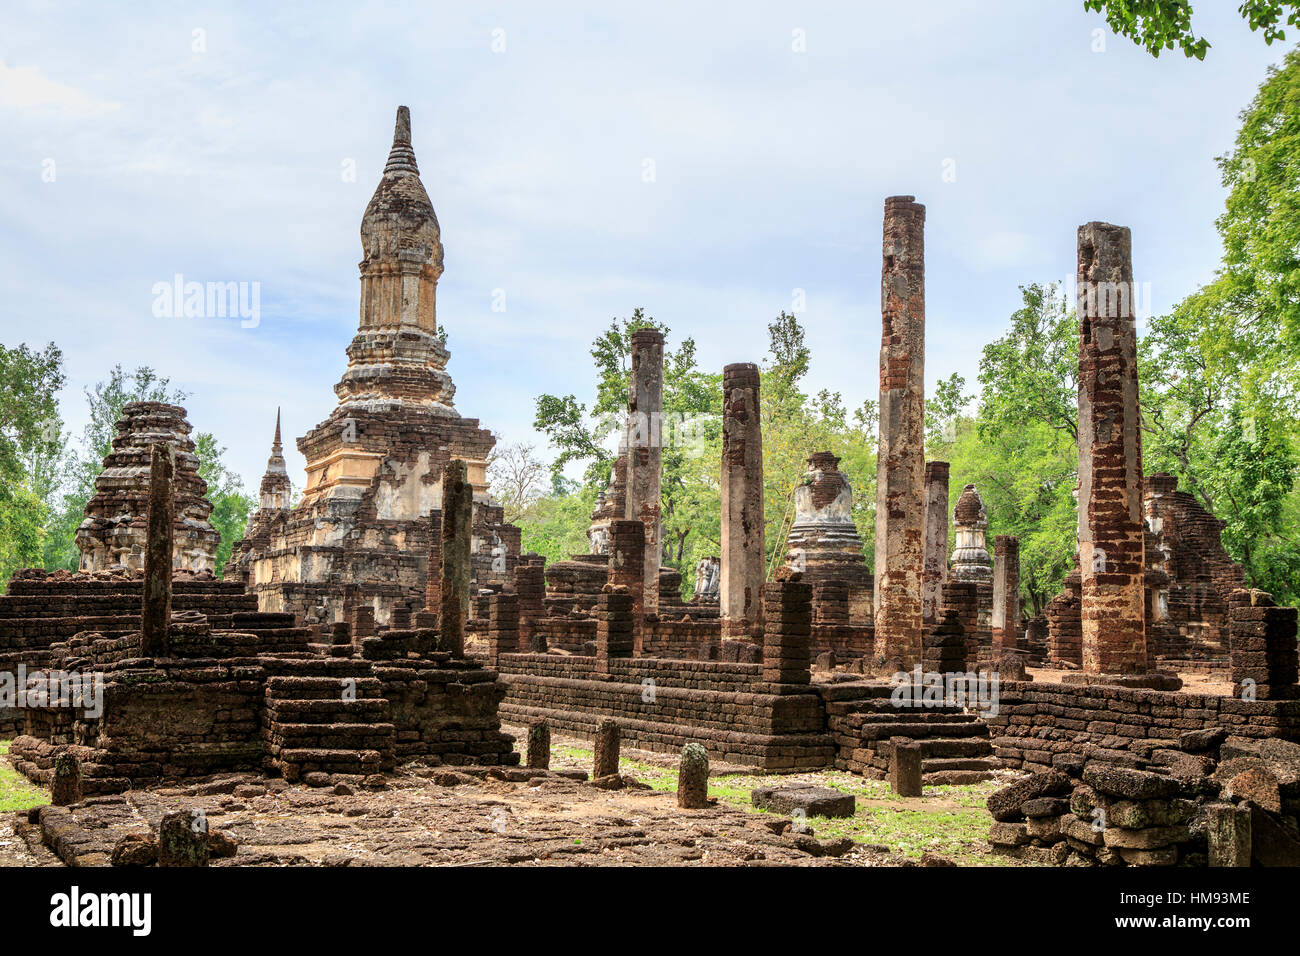 Buddhist chedi (stupa) and temple in Si Satchanalai Historical Park, Sukhothai, Thailand, Southeast Asia Stock Photo